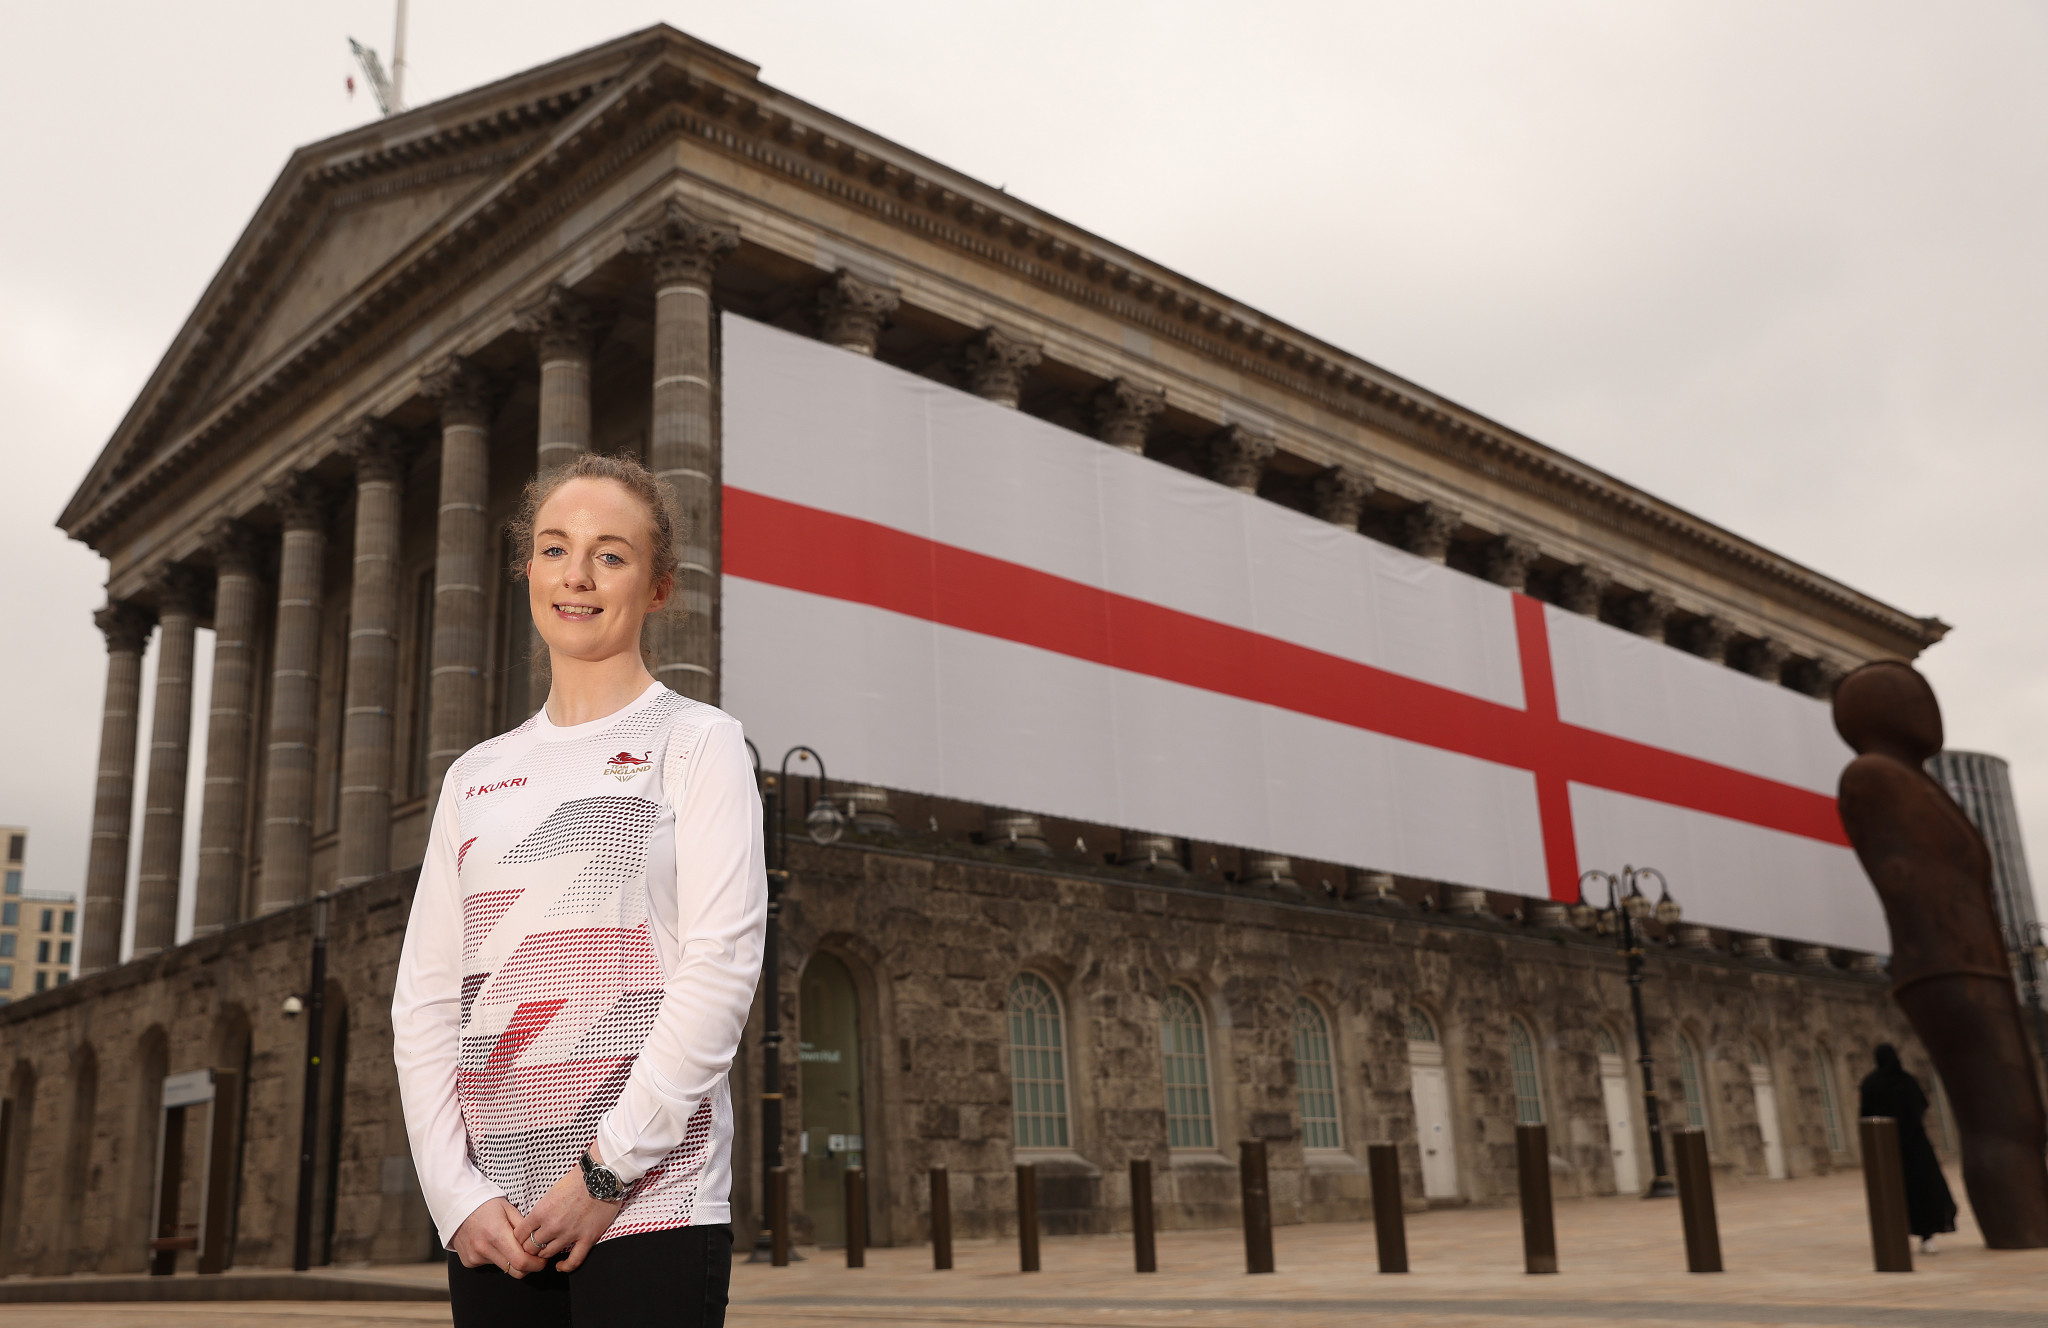 Wheelchair basketballer Siobhan Fitzpatrick of Team England was present at Birmingham Town Hall today ©Getty Images